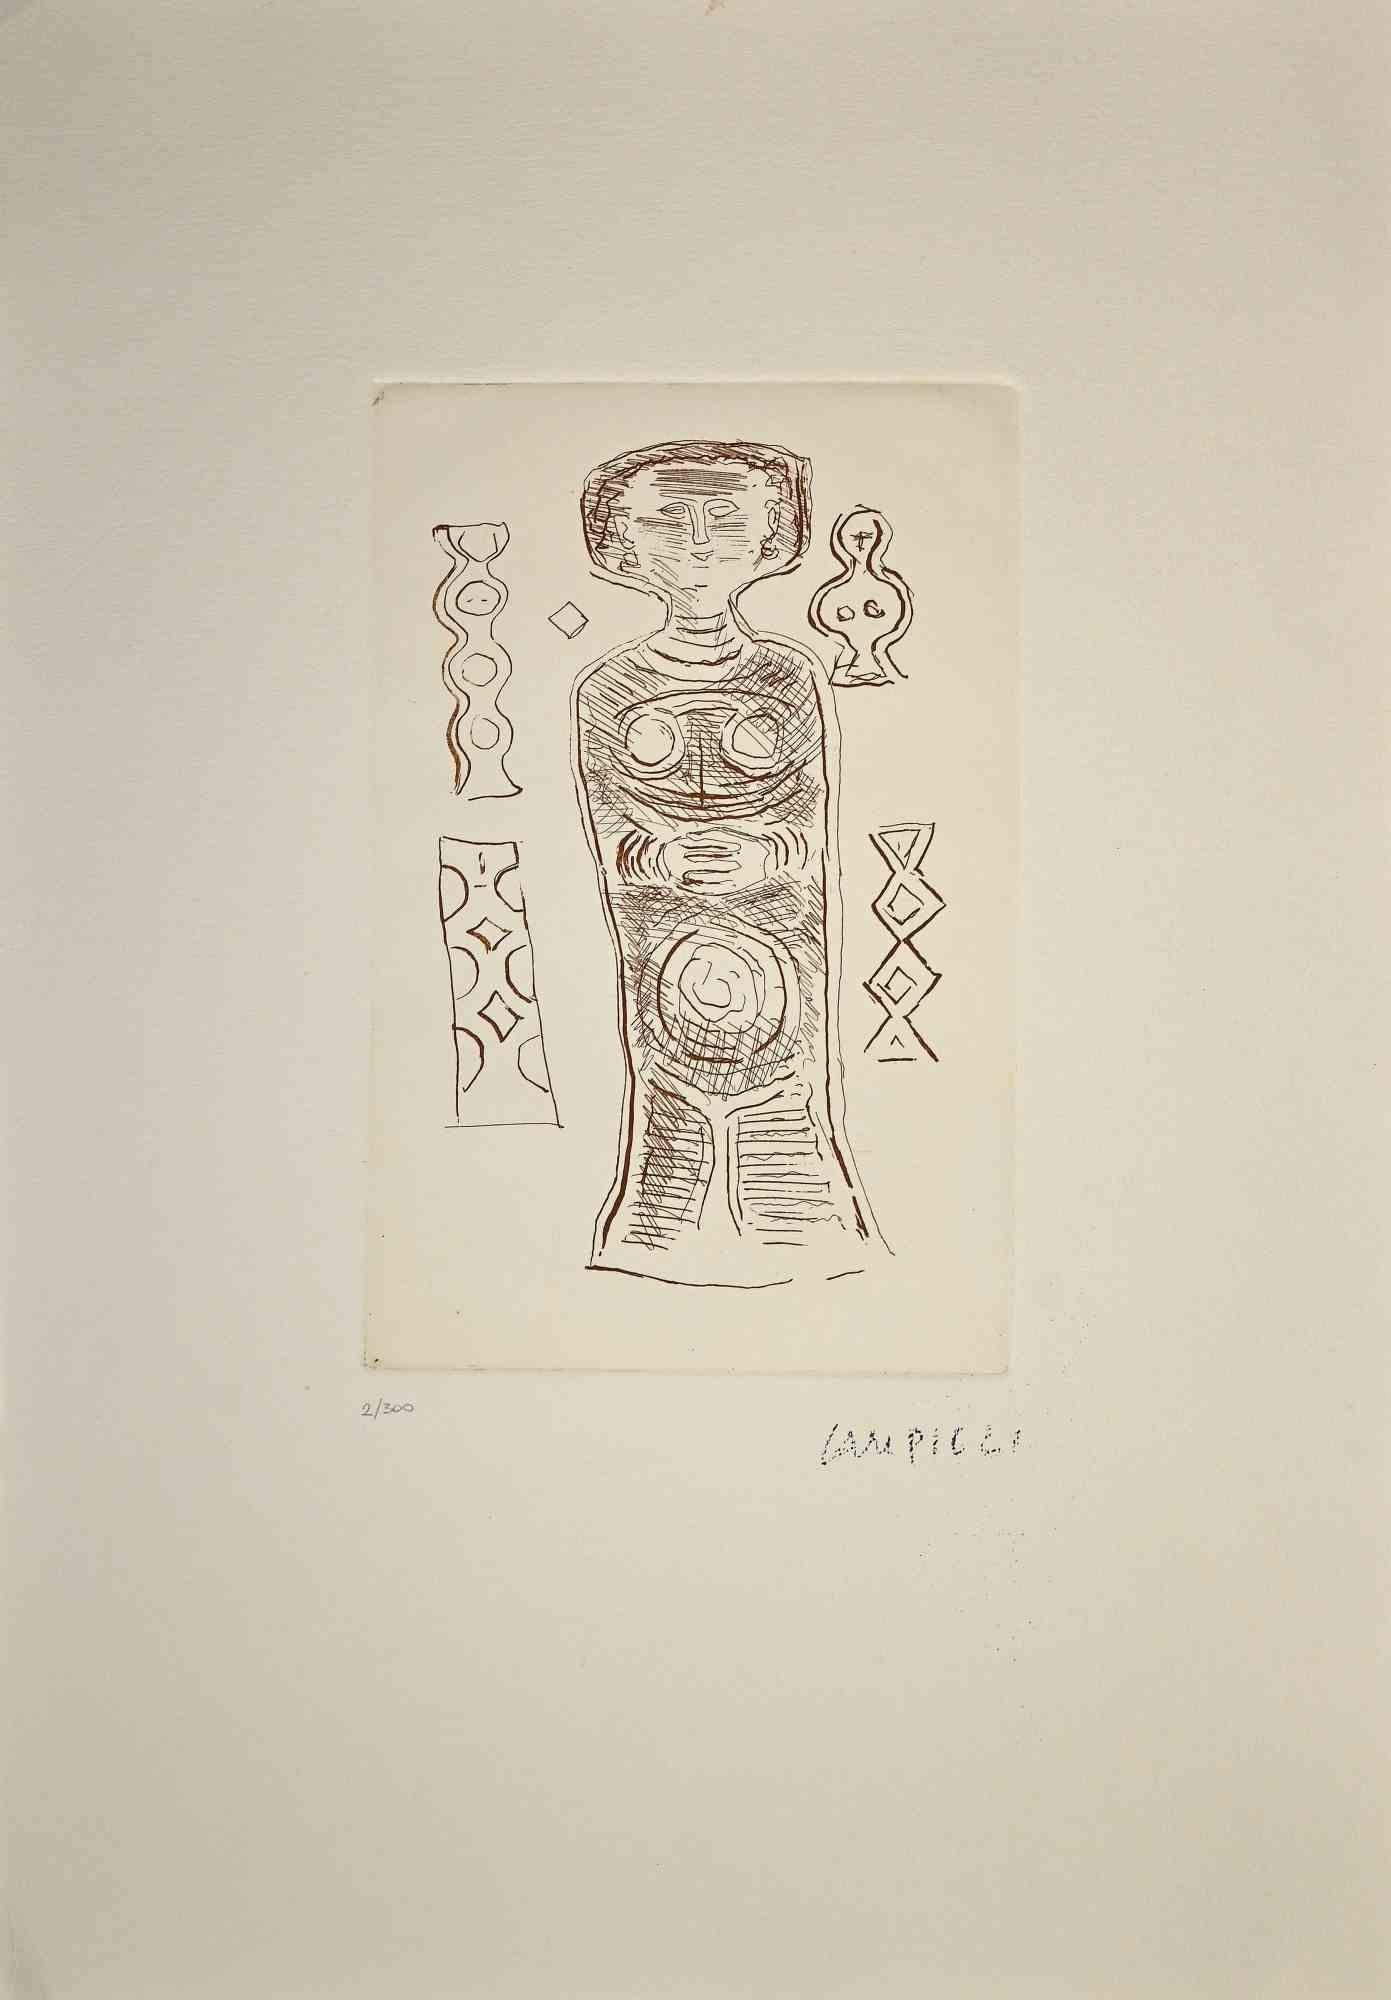 The idol  is an original print realized by Massimo Campigli in the 1970/1971.

 

Etching on paper.

This artwork it is part of a series of works created in the last period of the artist and printed at the turn of the year of his death, which took